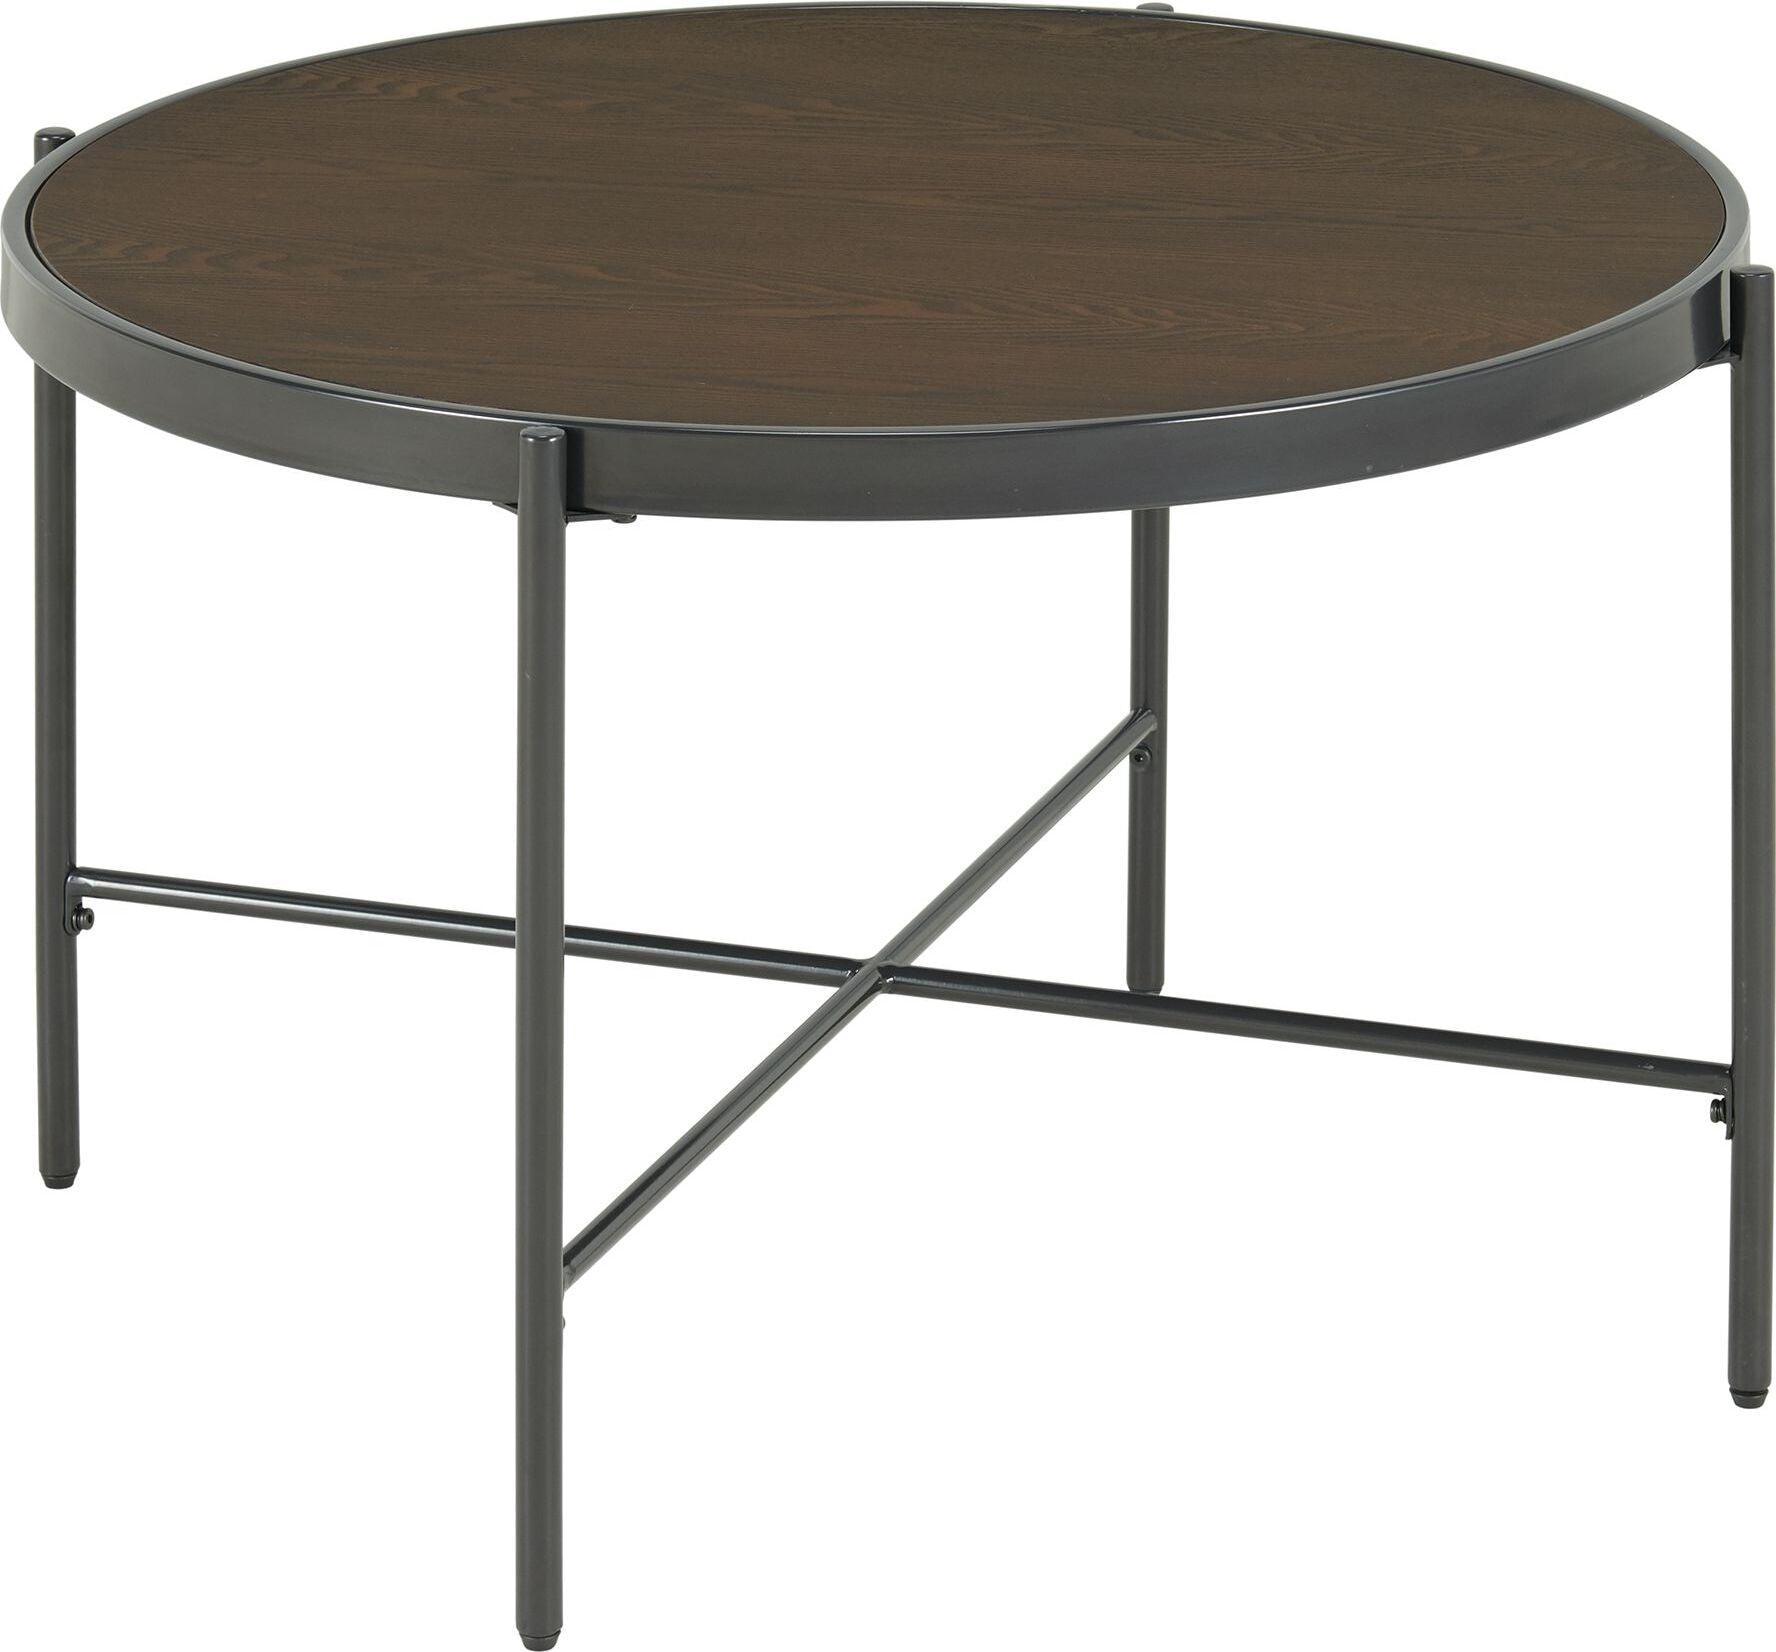 Elements Coffee Tables - Carlo Round Coffee Table Brown & Black